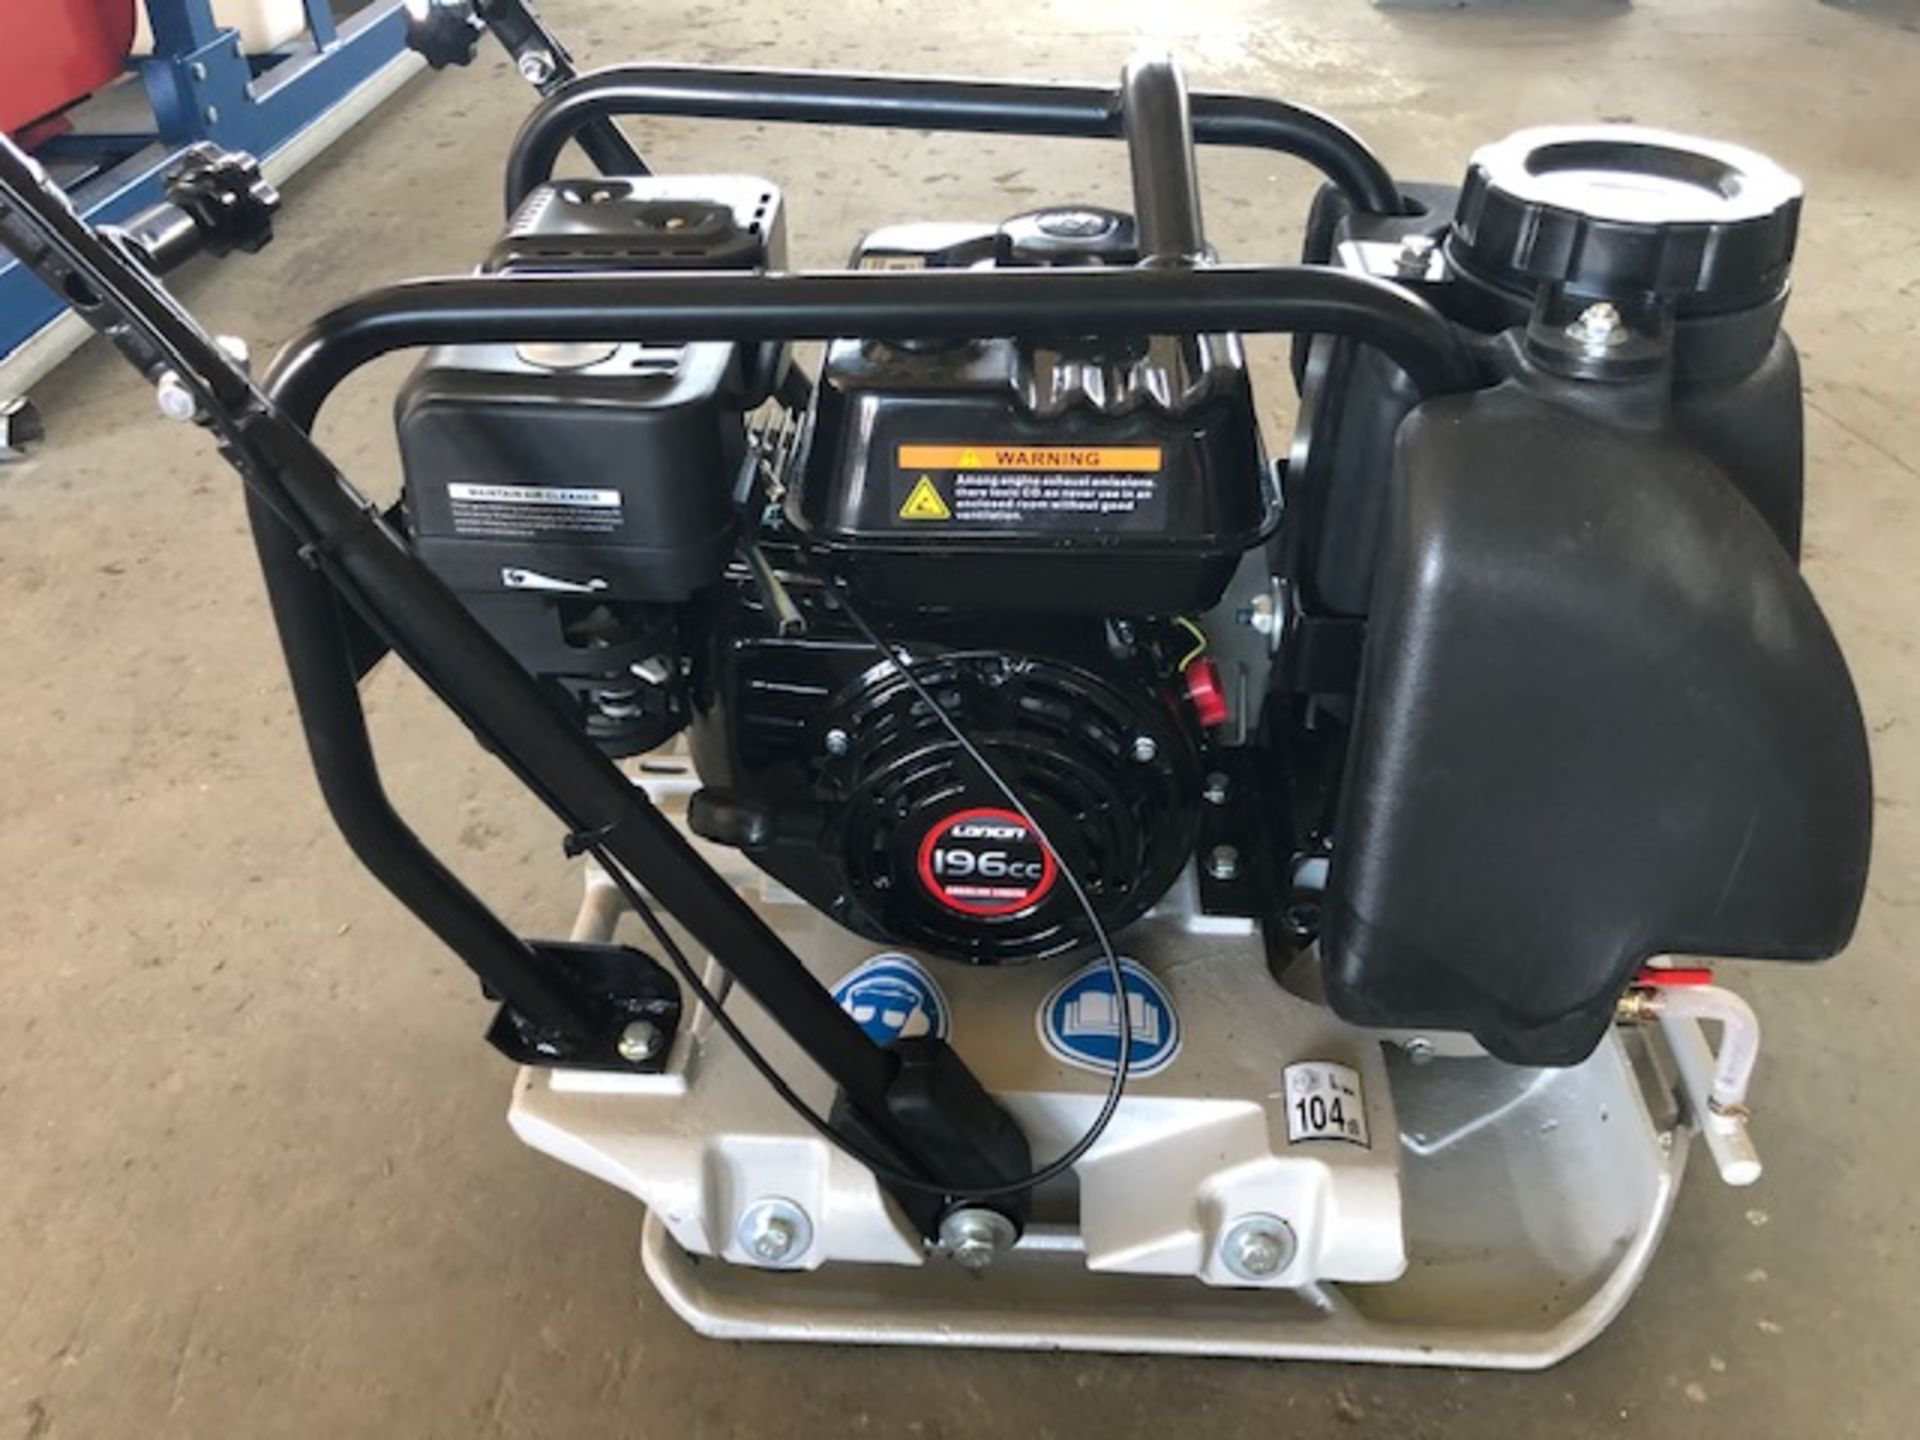 2021 Mustang LF-88 Plate Compactor - Image 4 of 5